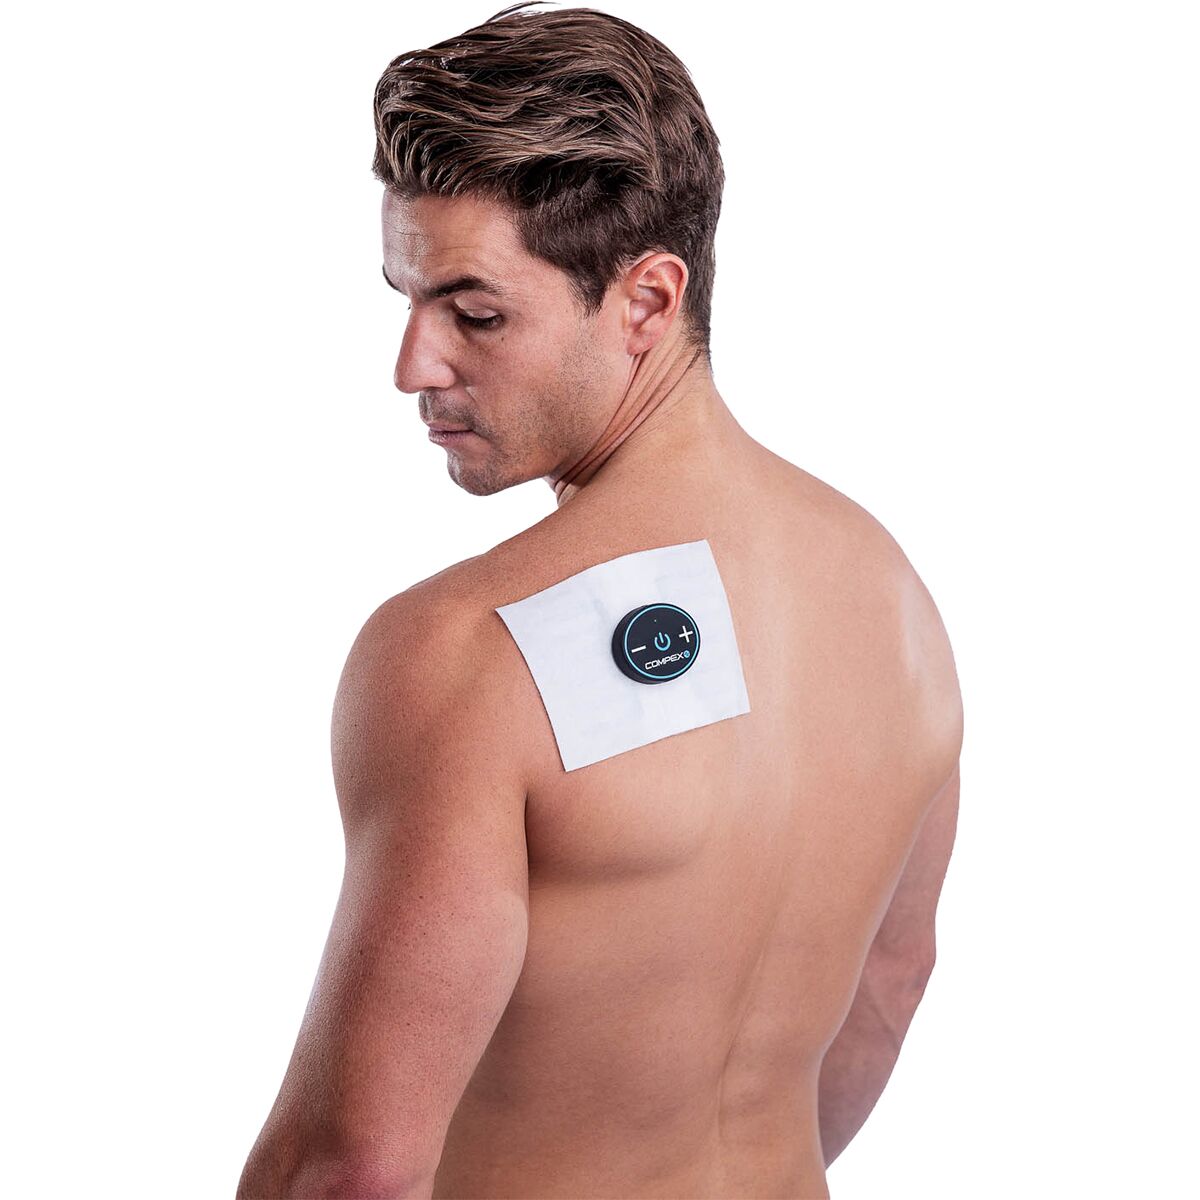 Compex Fuse Tens with Lidocane Therapy Kit